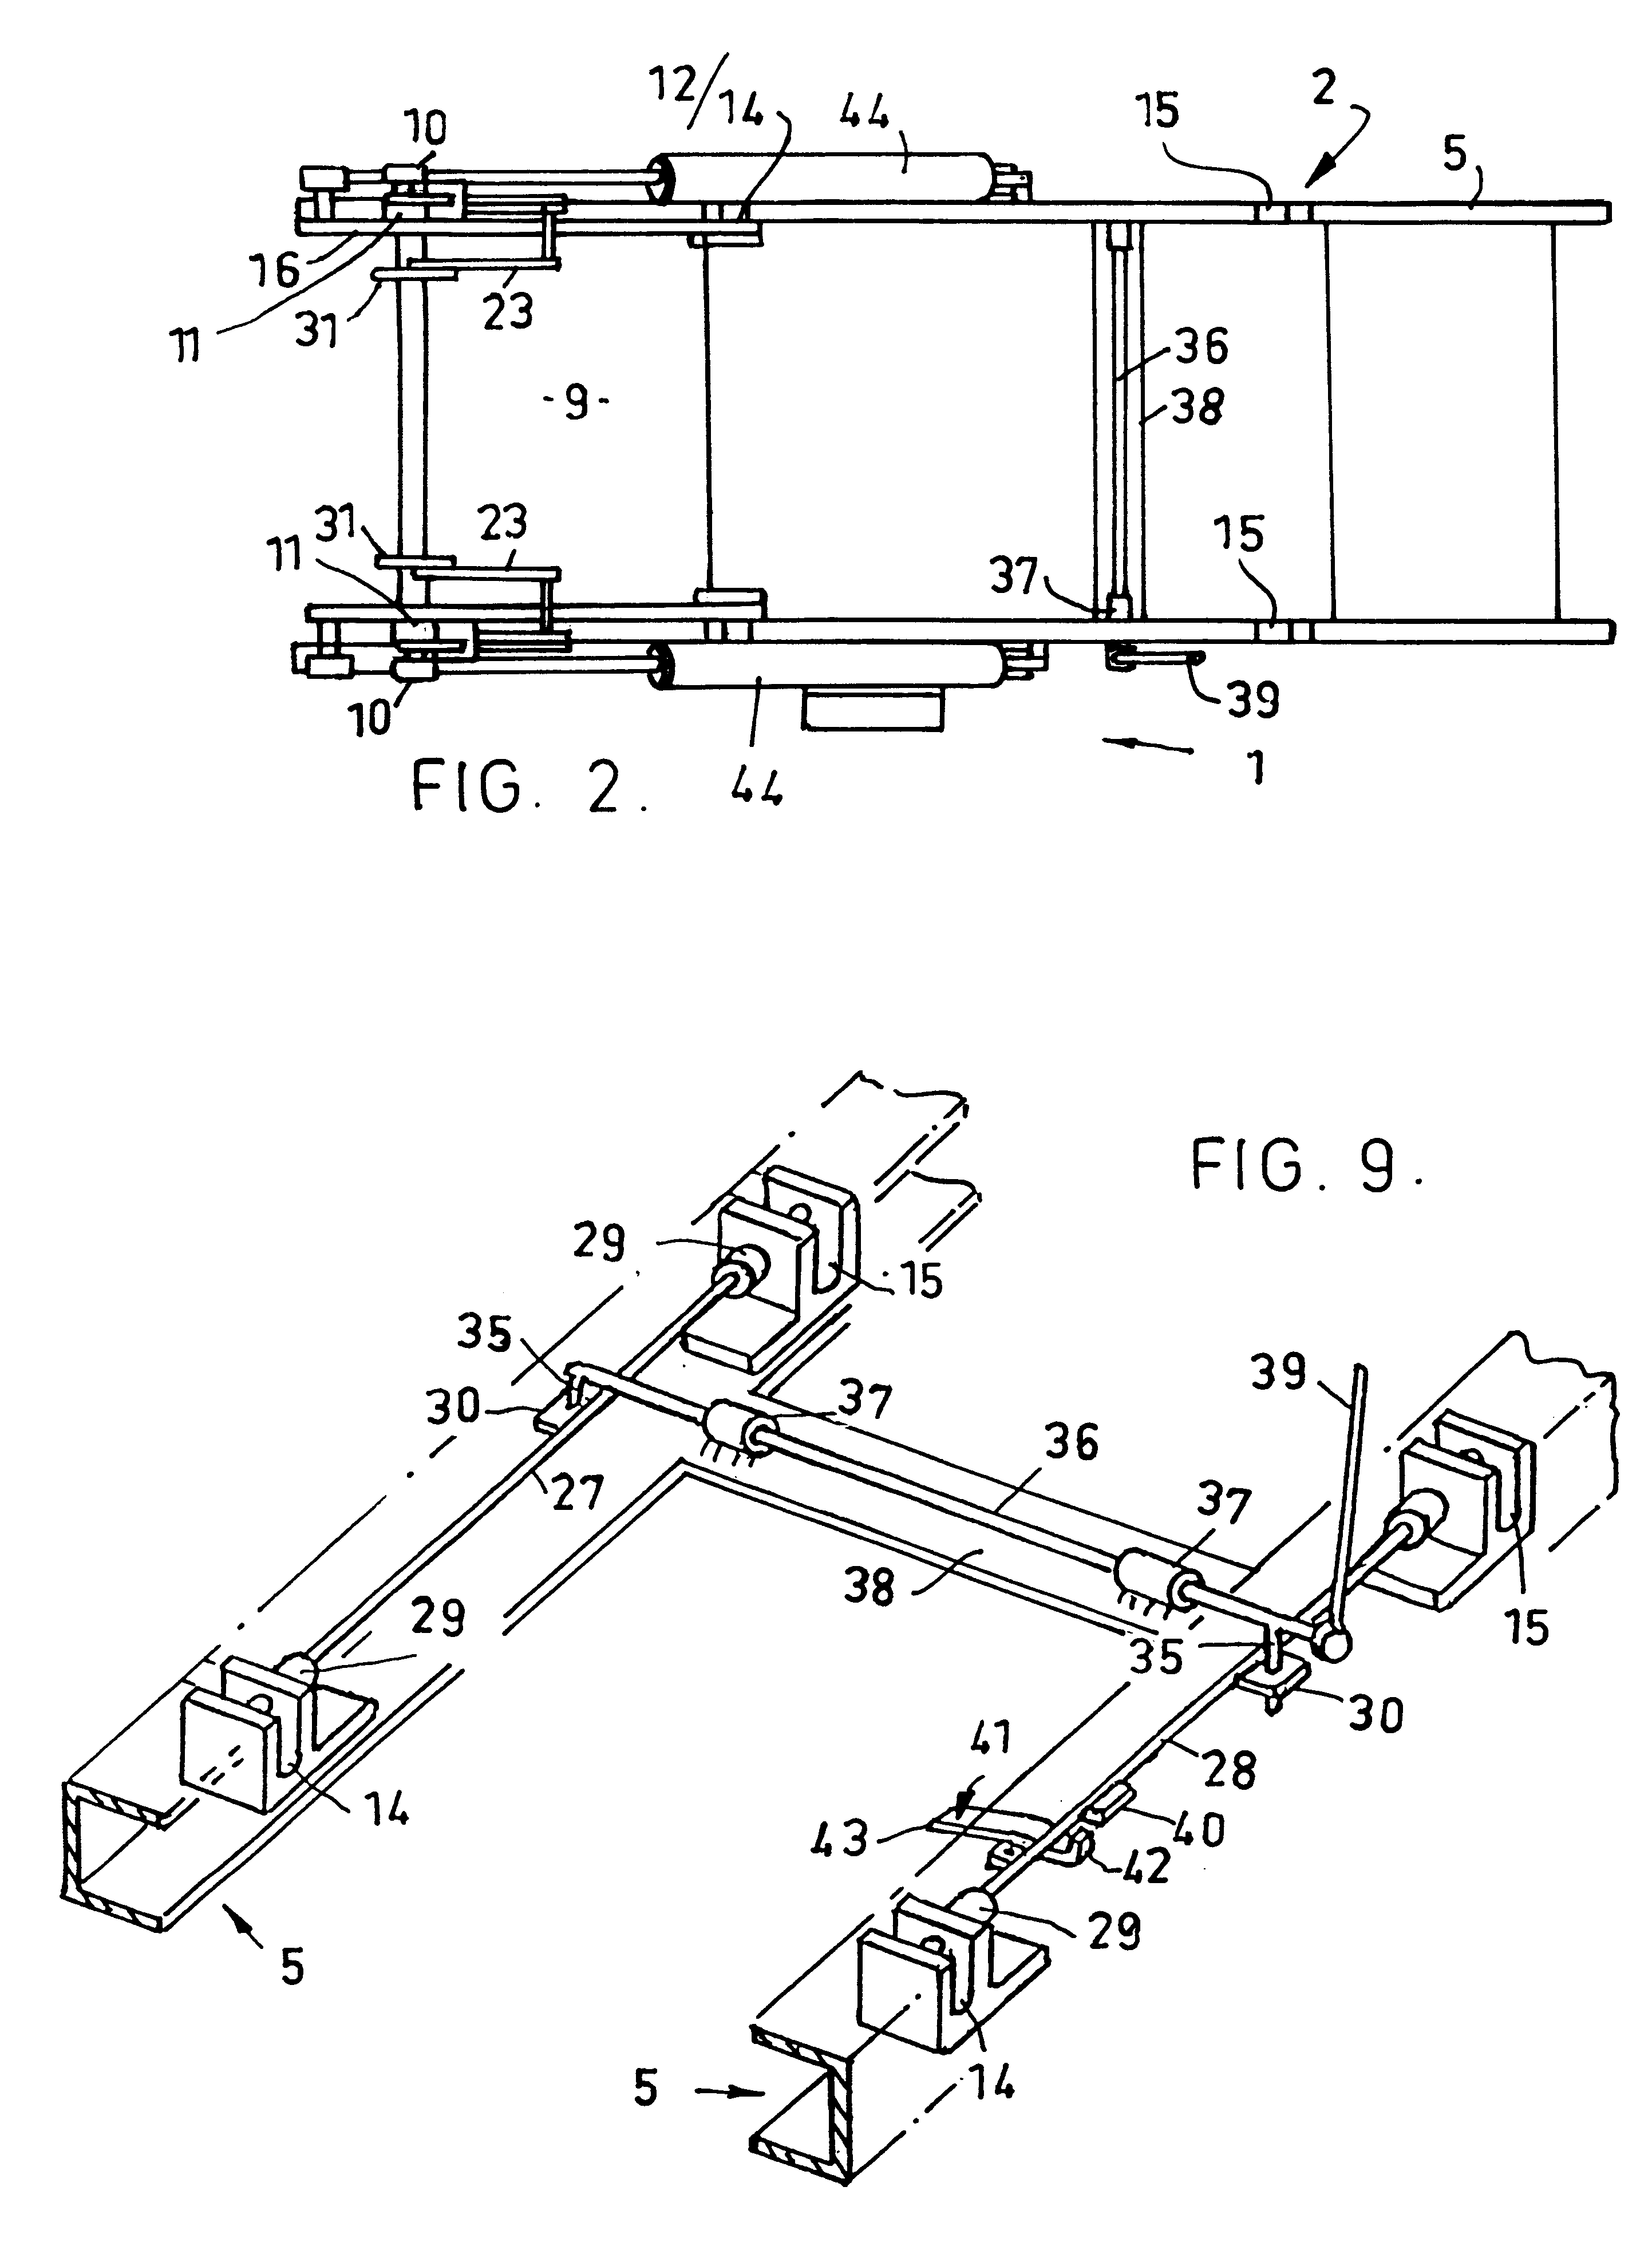 Apparatus for inverting containers